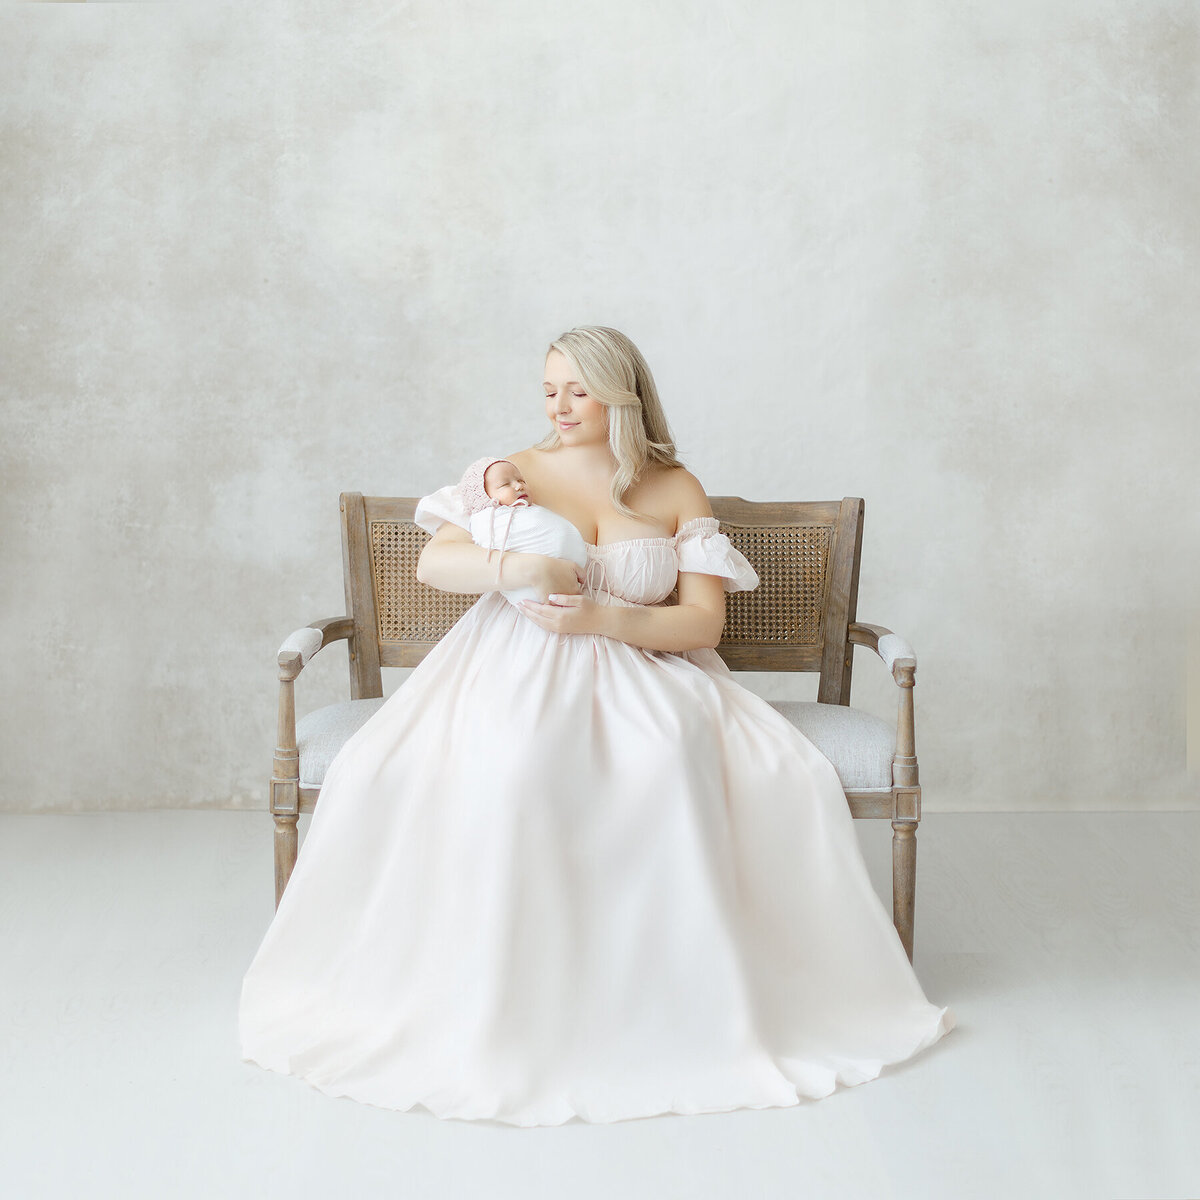 Elegant newborn photo taken in a DFW photography studio of a mother sitting on a chair while she holds her newborn baby girl.